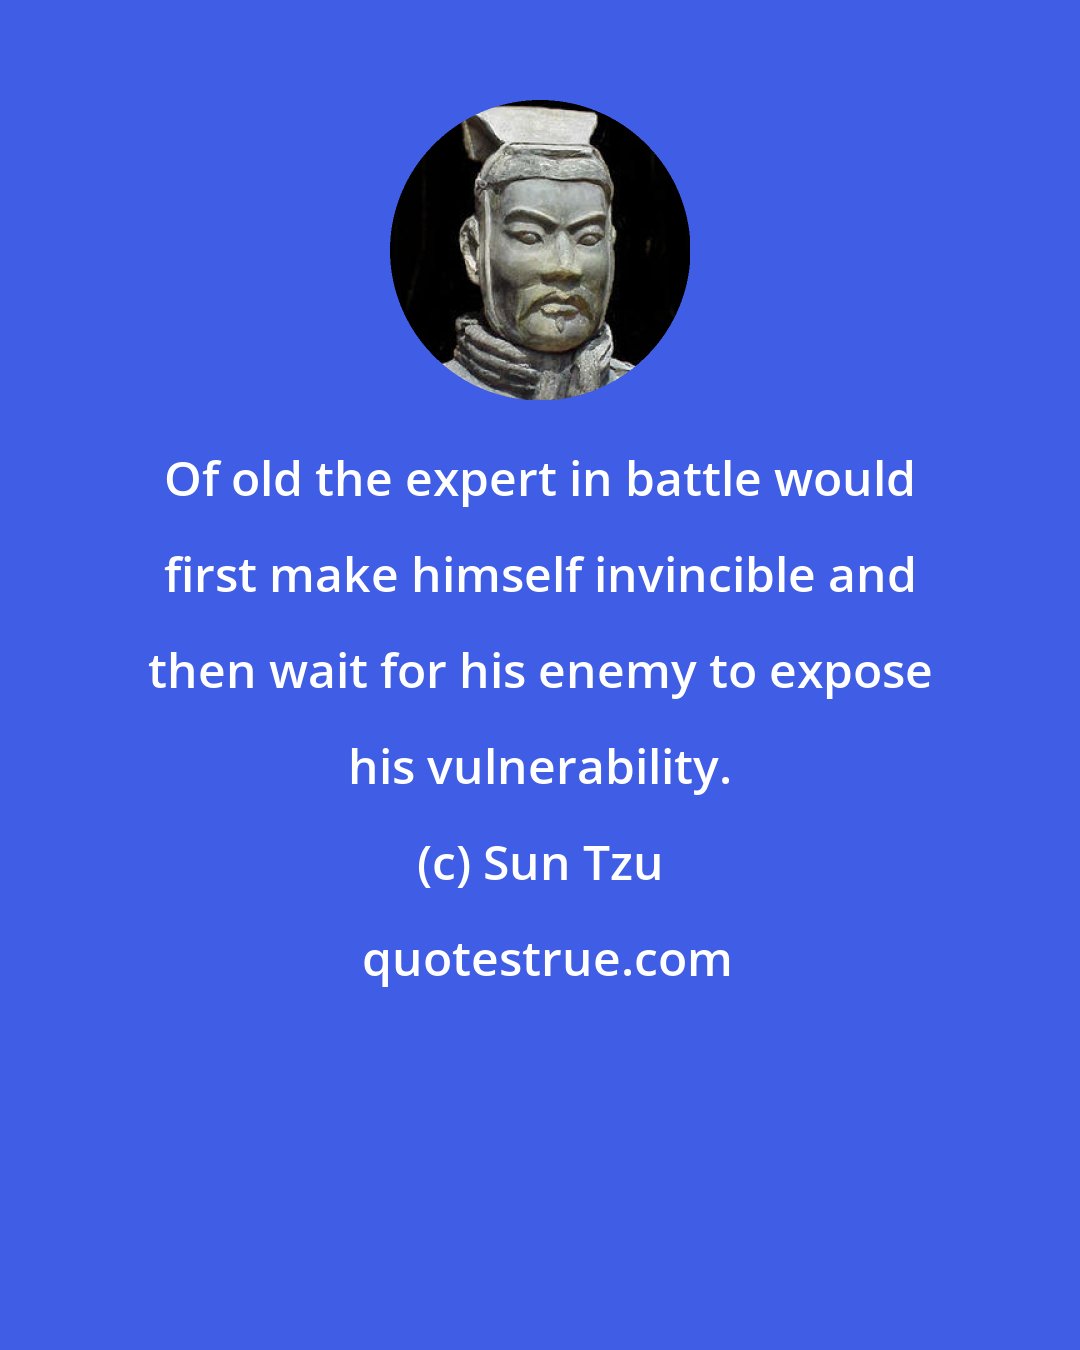 Sun Tzu: Of old the expert in battle would first make himself invincible and then wait for his enemy to expose his vulnerability.